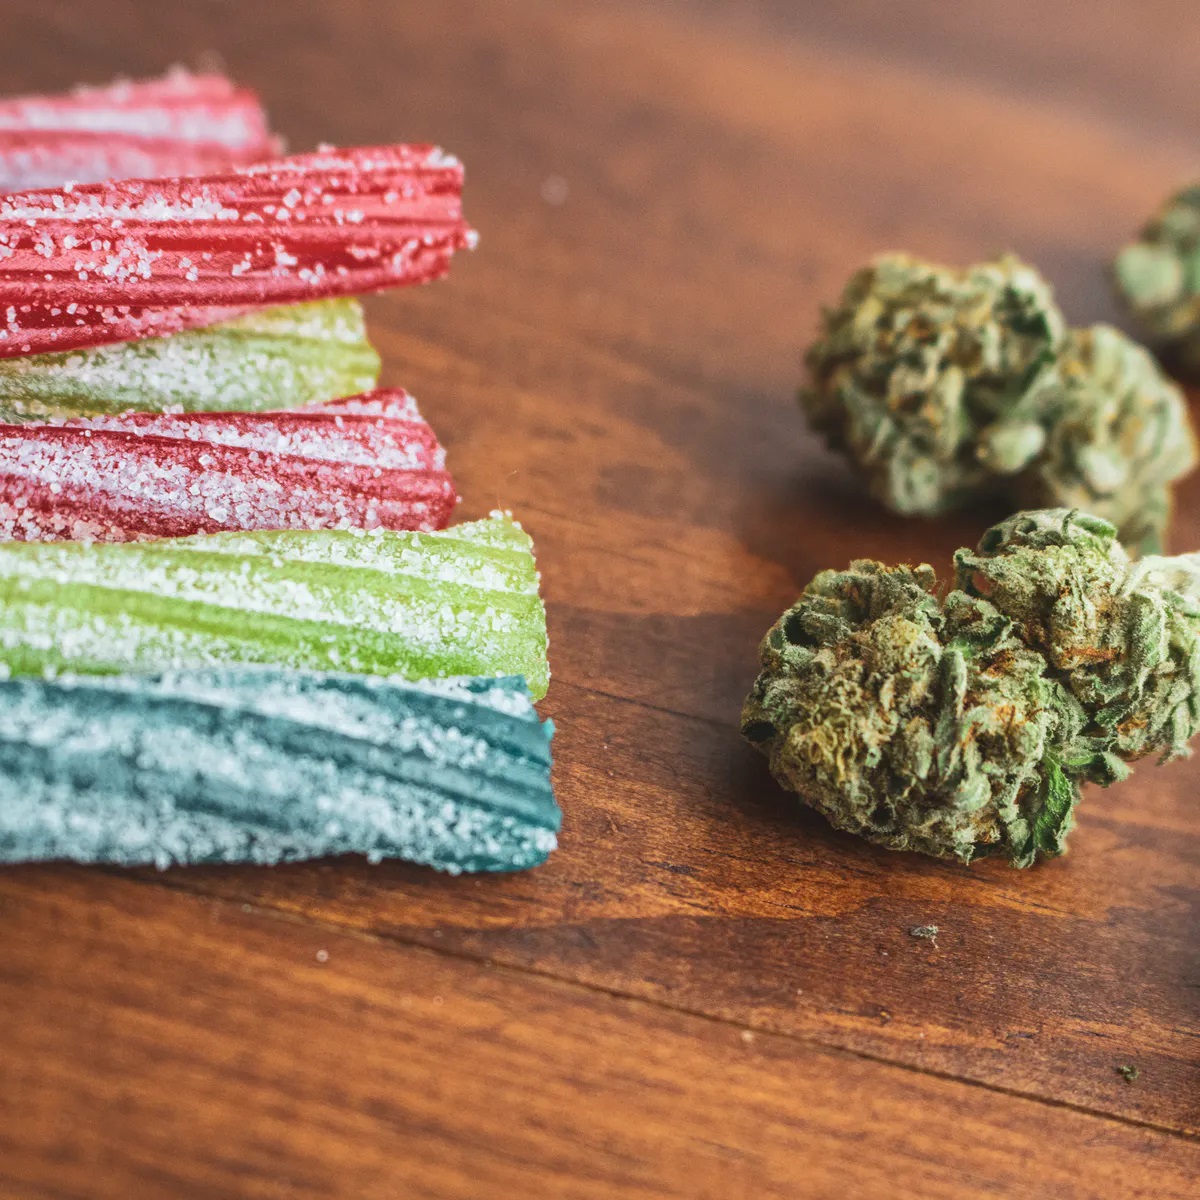 Study Finds that Children are at an Increased Risk of Being Poisoned by Marijuana Edibles